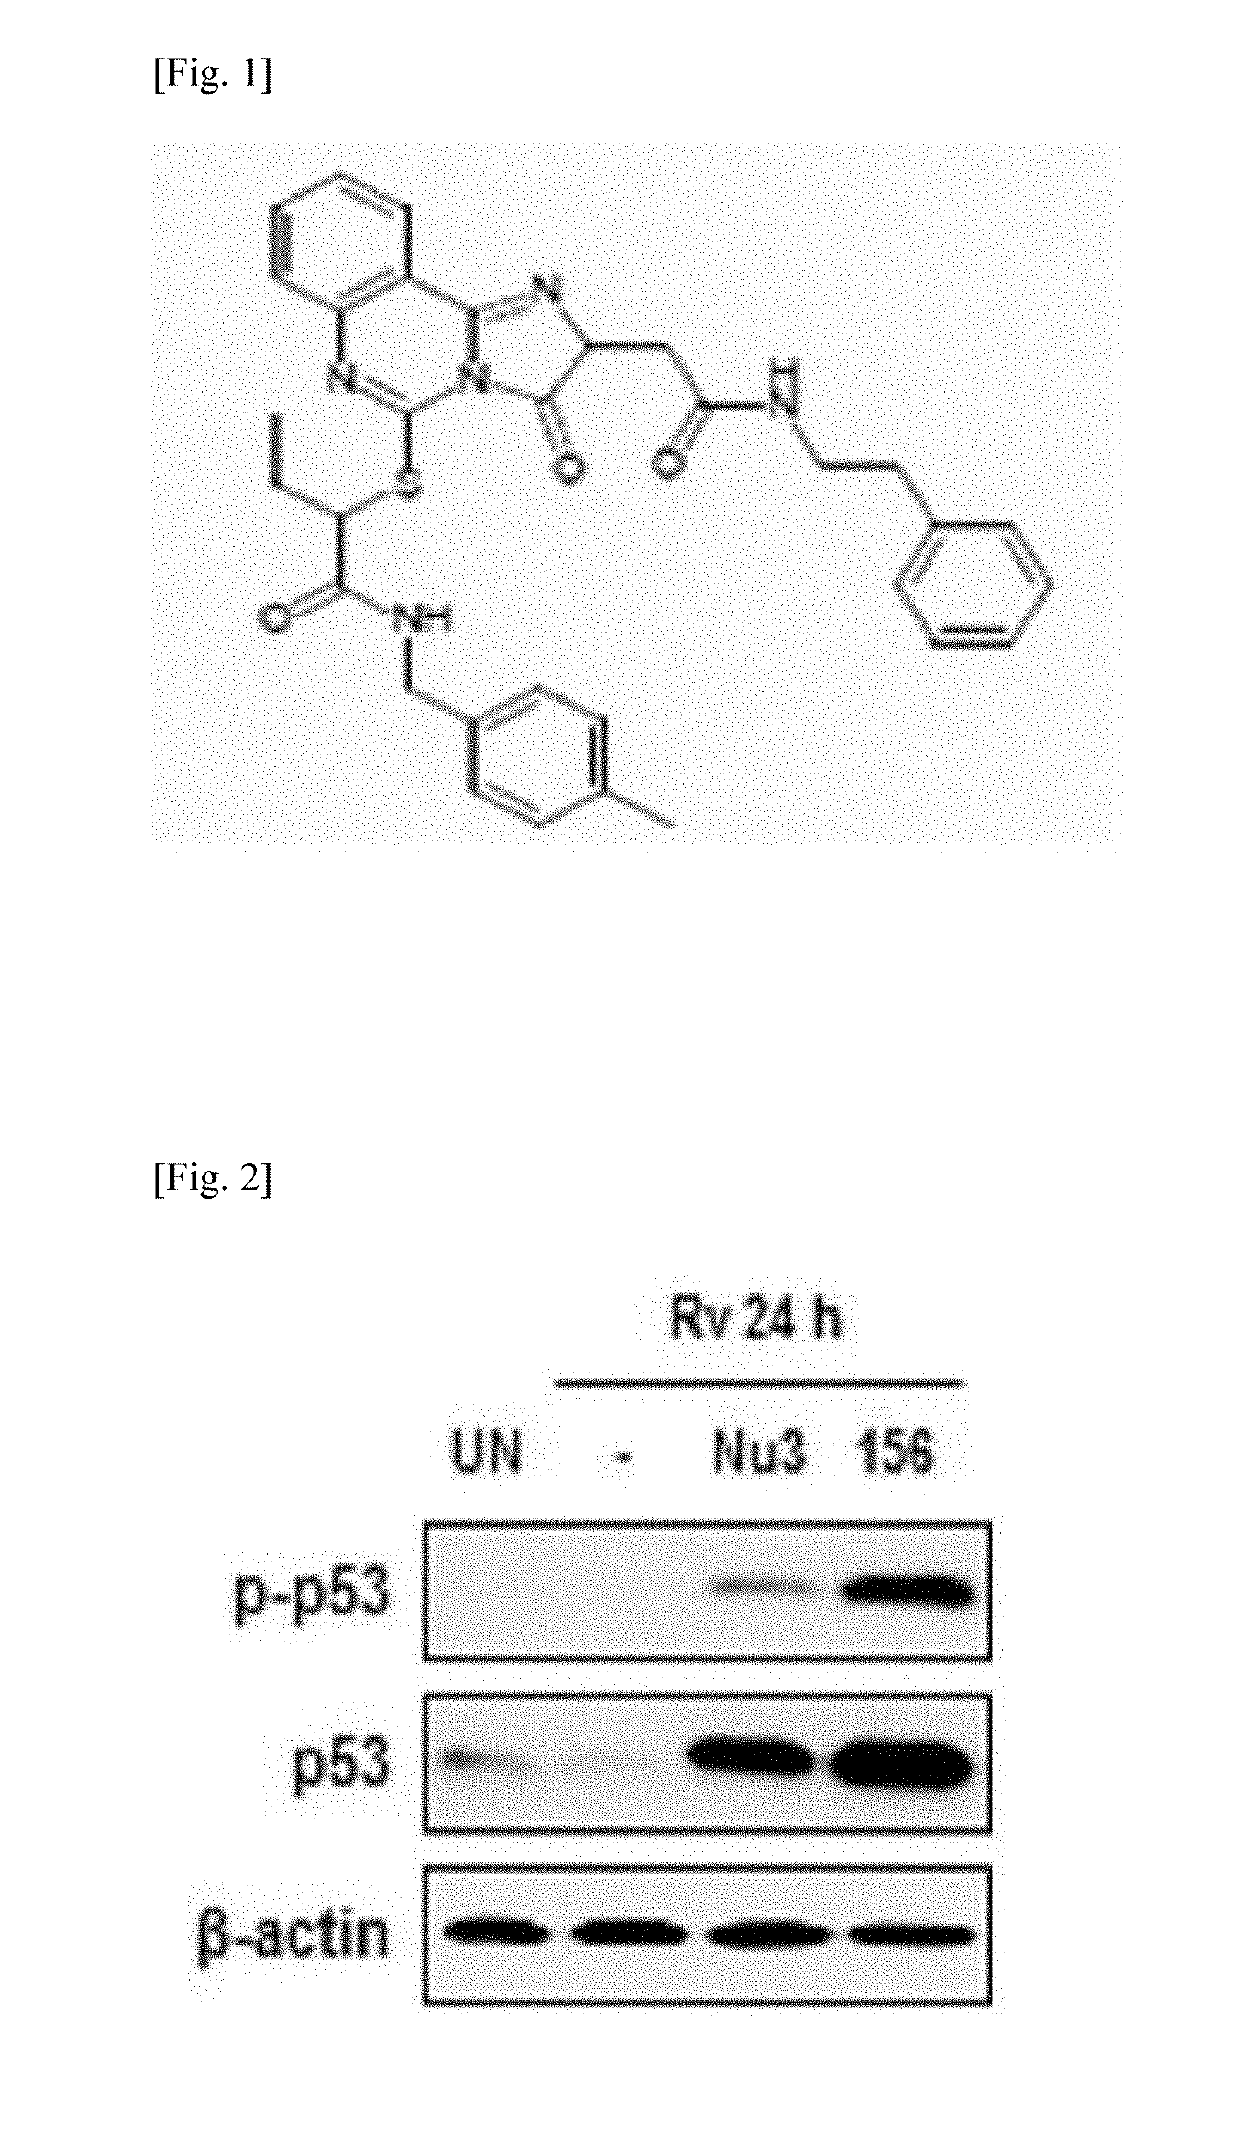 Method for preventing or treating tuberculosis by a p53 expression regulating composition for m. tuberculosis control in cells and the use thereof